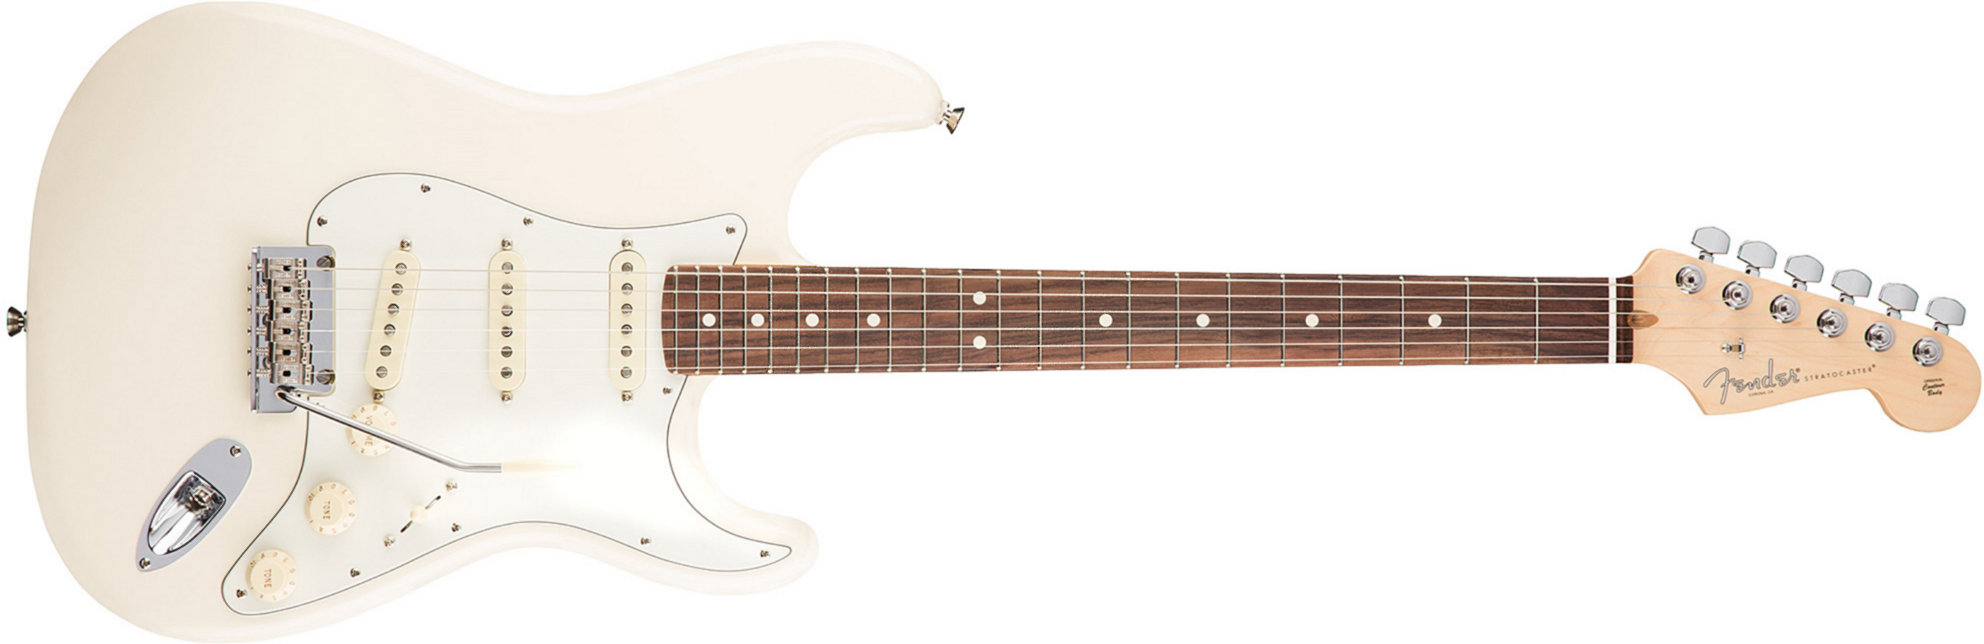 Fender Strat American Professional 2017 3s Usa Rw - Olympic White - Str shape electric guitar - Main picture